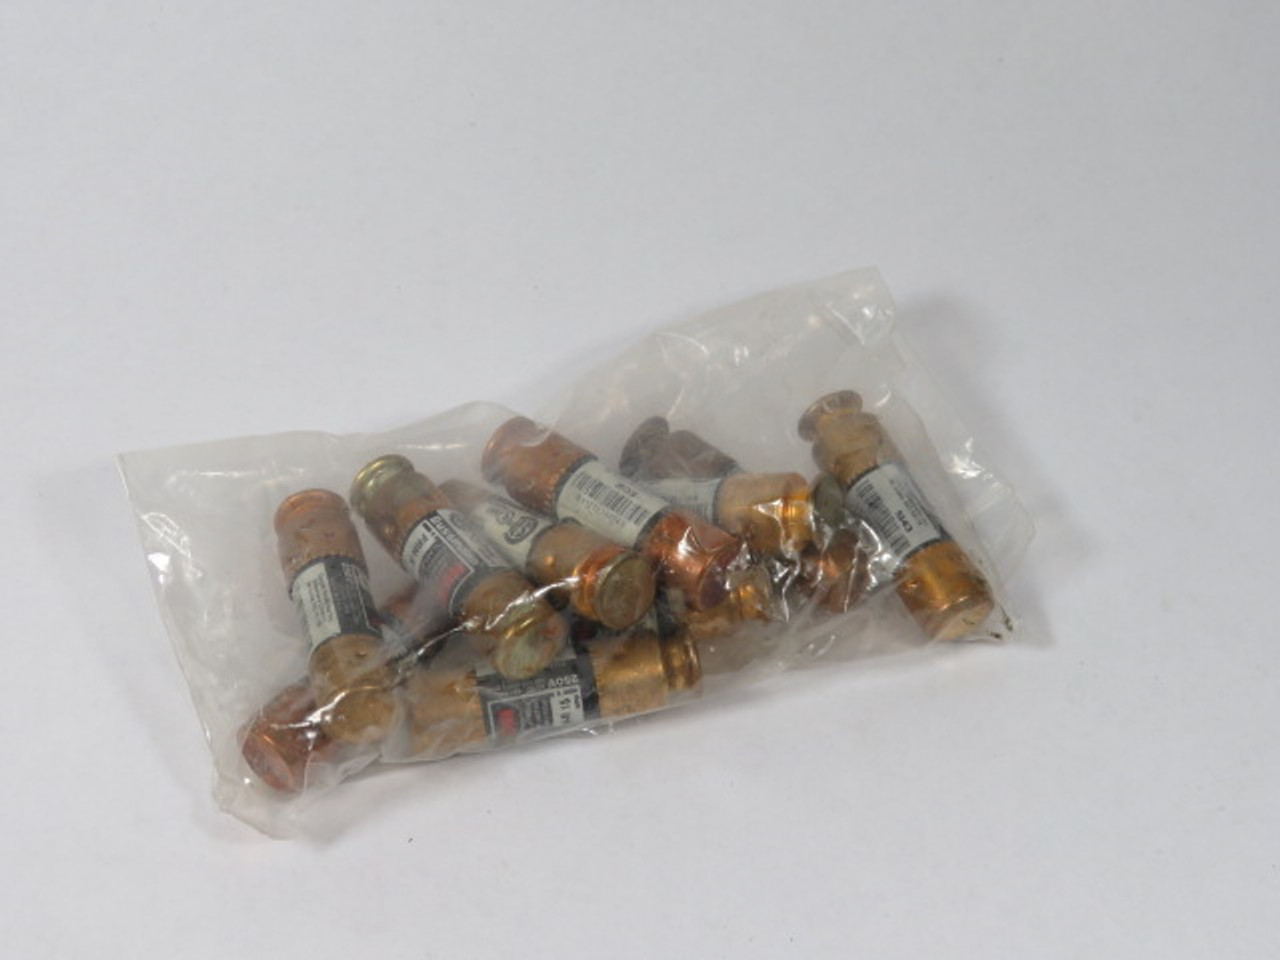 Fusetron FRN-R-15 Dual Element Time Delay Fuse 15A 250V Lot of 10 USED